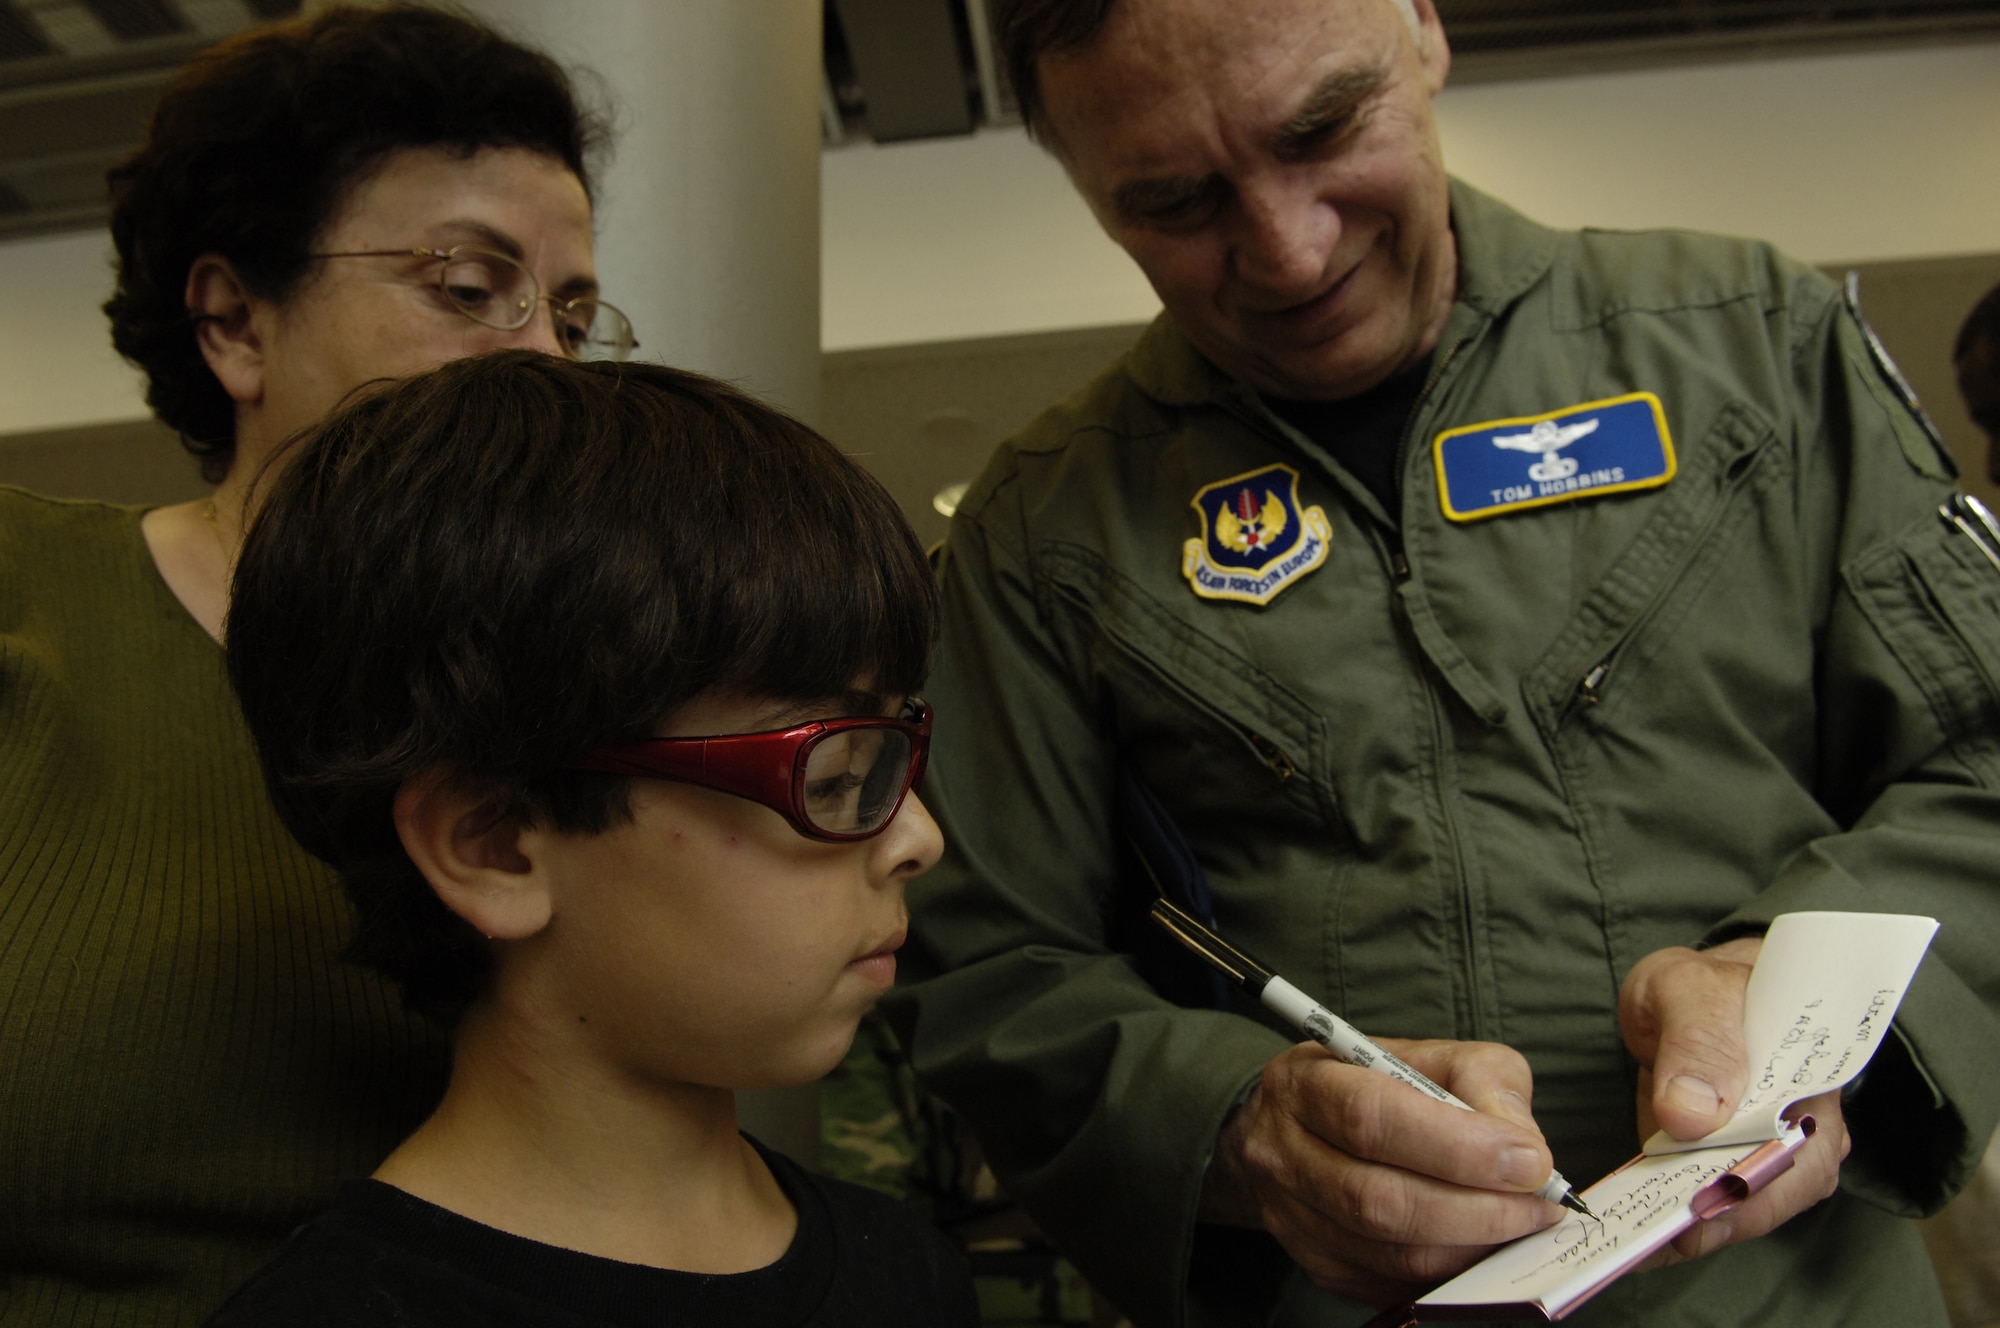 Gen. Tom Hobbins, commander of U.S. Air Forces in Europe, signs an autograph for Danni Chmait, American departee, at Ramstein Air Base, Germany on July 22, 2006. After landing at Ramstein, 101 American departees from Lebanon wait in the passenger terminal to travel on to the continental U.S. by means of a C-17 Globemaster aircraft. (U.S. Air Force photo by Staff Sgt. Stacy L. Pearsall)(released)
